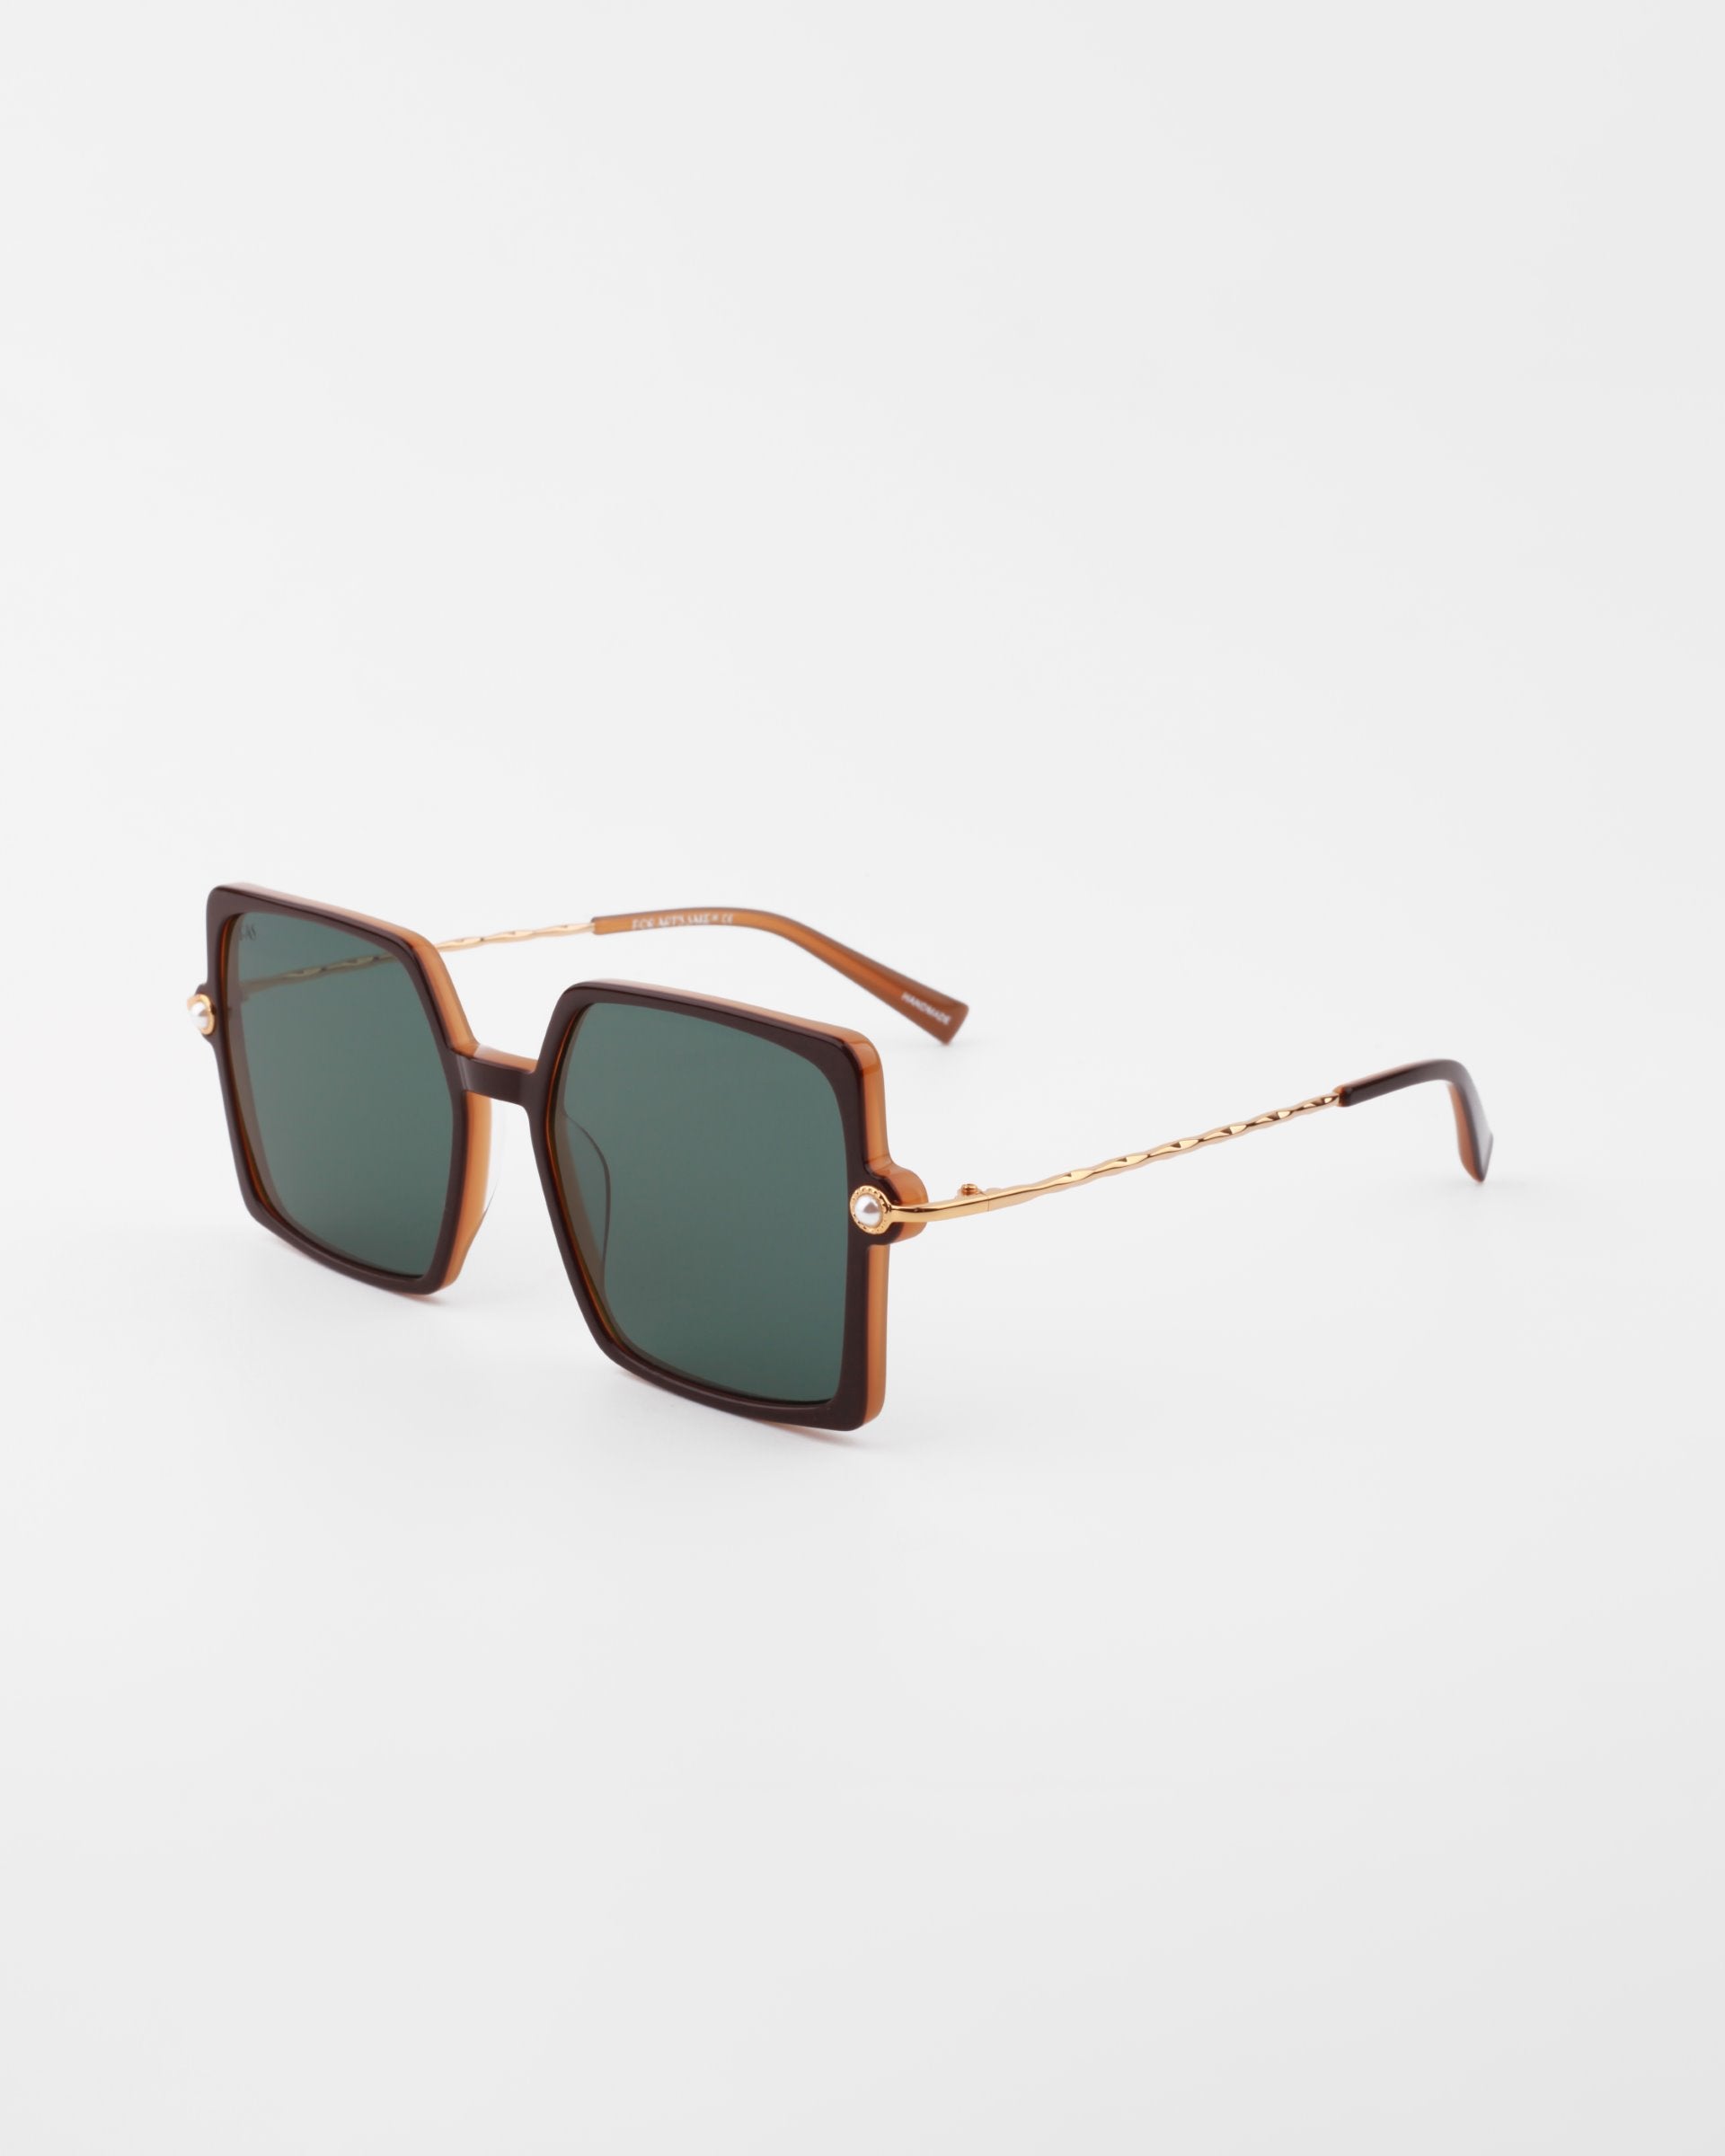 A pair of Moxie by For Art&#39;s Sake® handmade acetate sunglasses with square, green-tinted lenses. The frame is brown, and the temples are 18-karat gold-plated with a thin, chain-link design and brown tips. Complete with UVA &amp; UVB protection, these Moxie sunglasses are positioned on a white background.